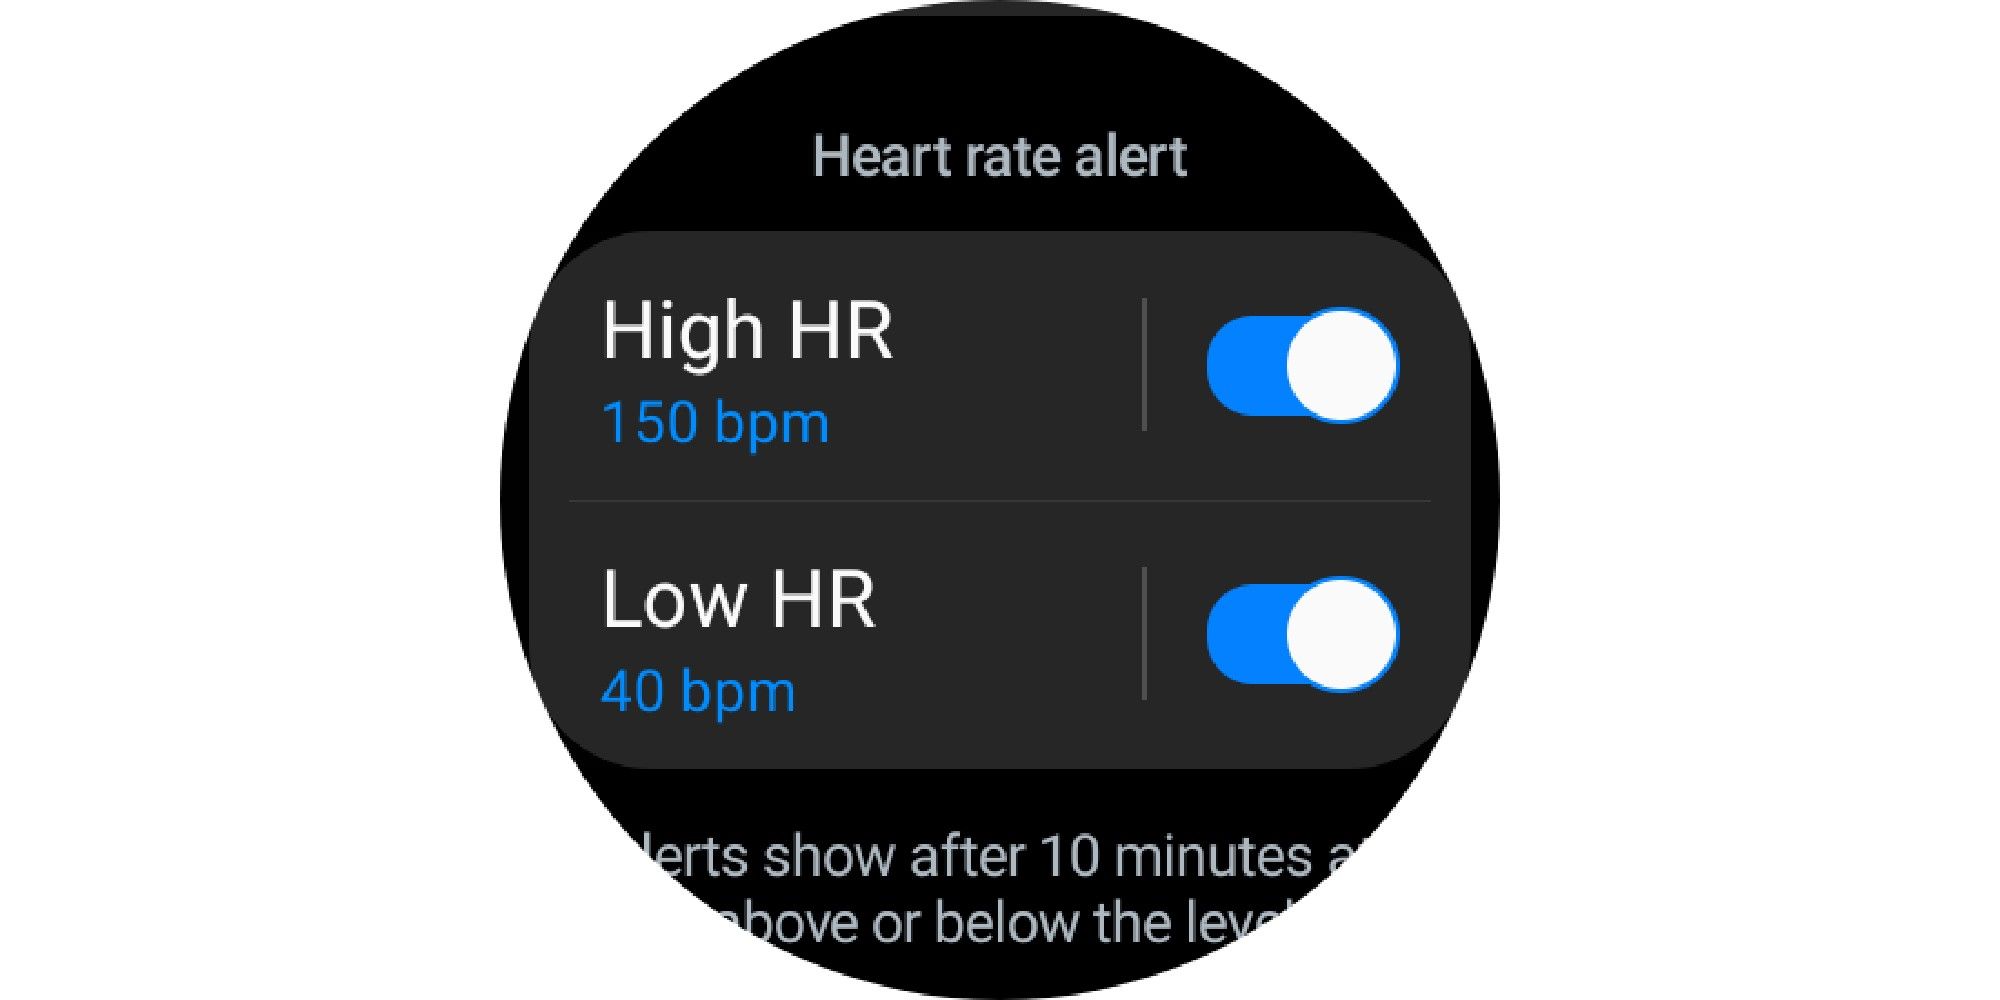 Setting up heart rate alerts on Samsung smartwatch